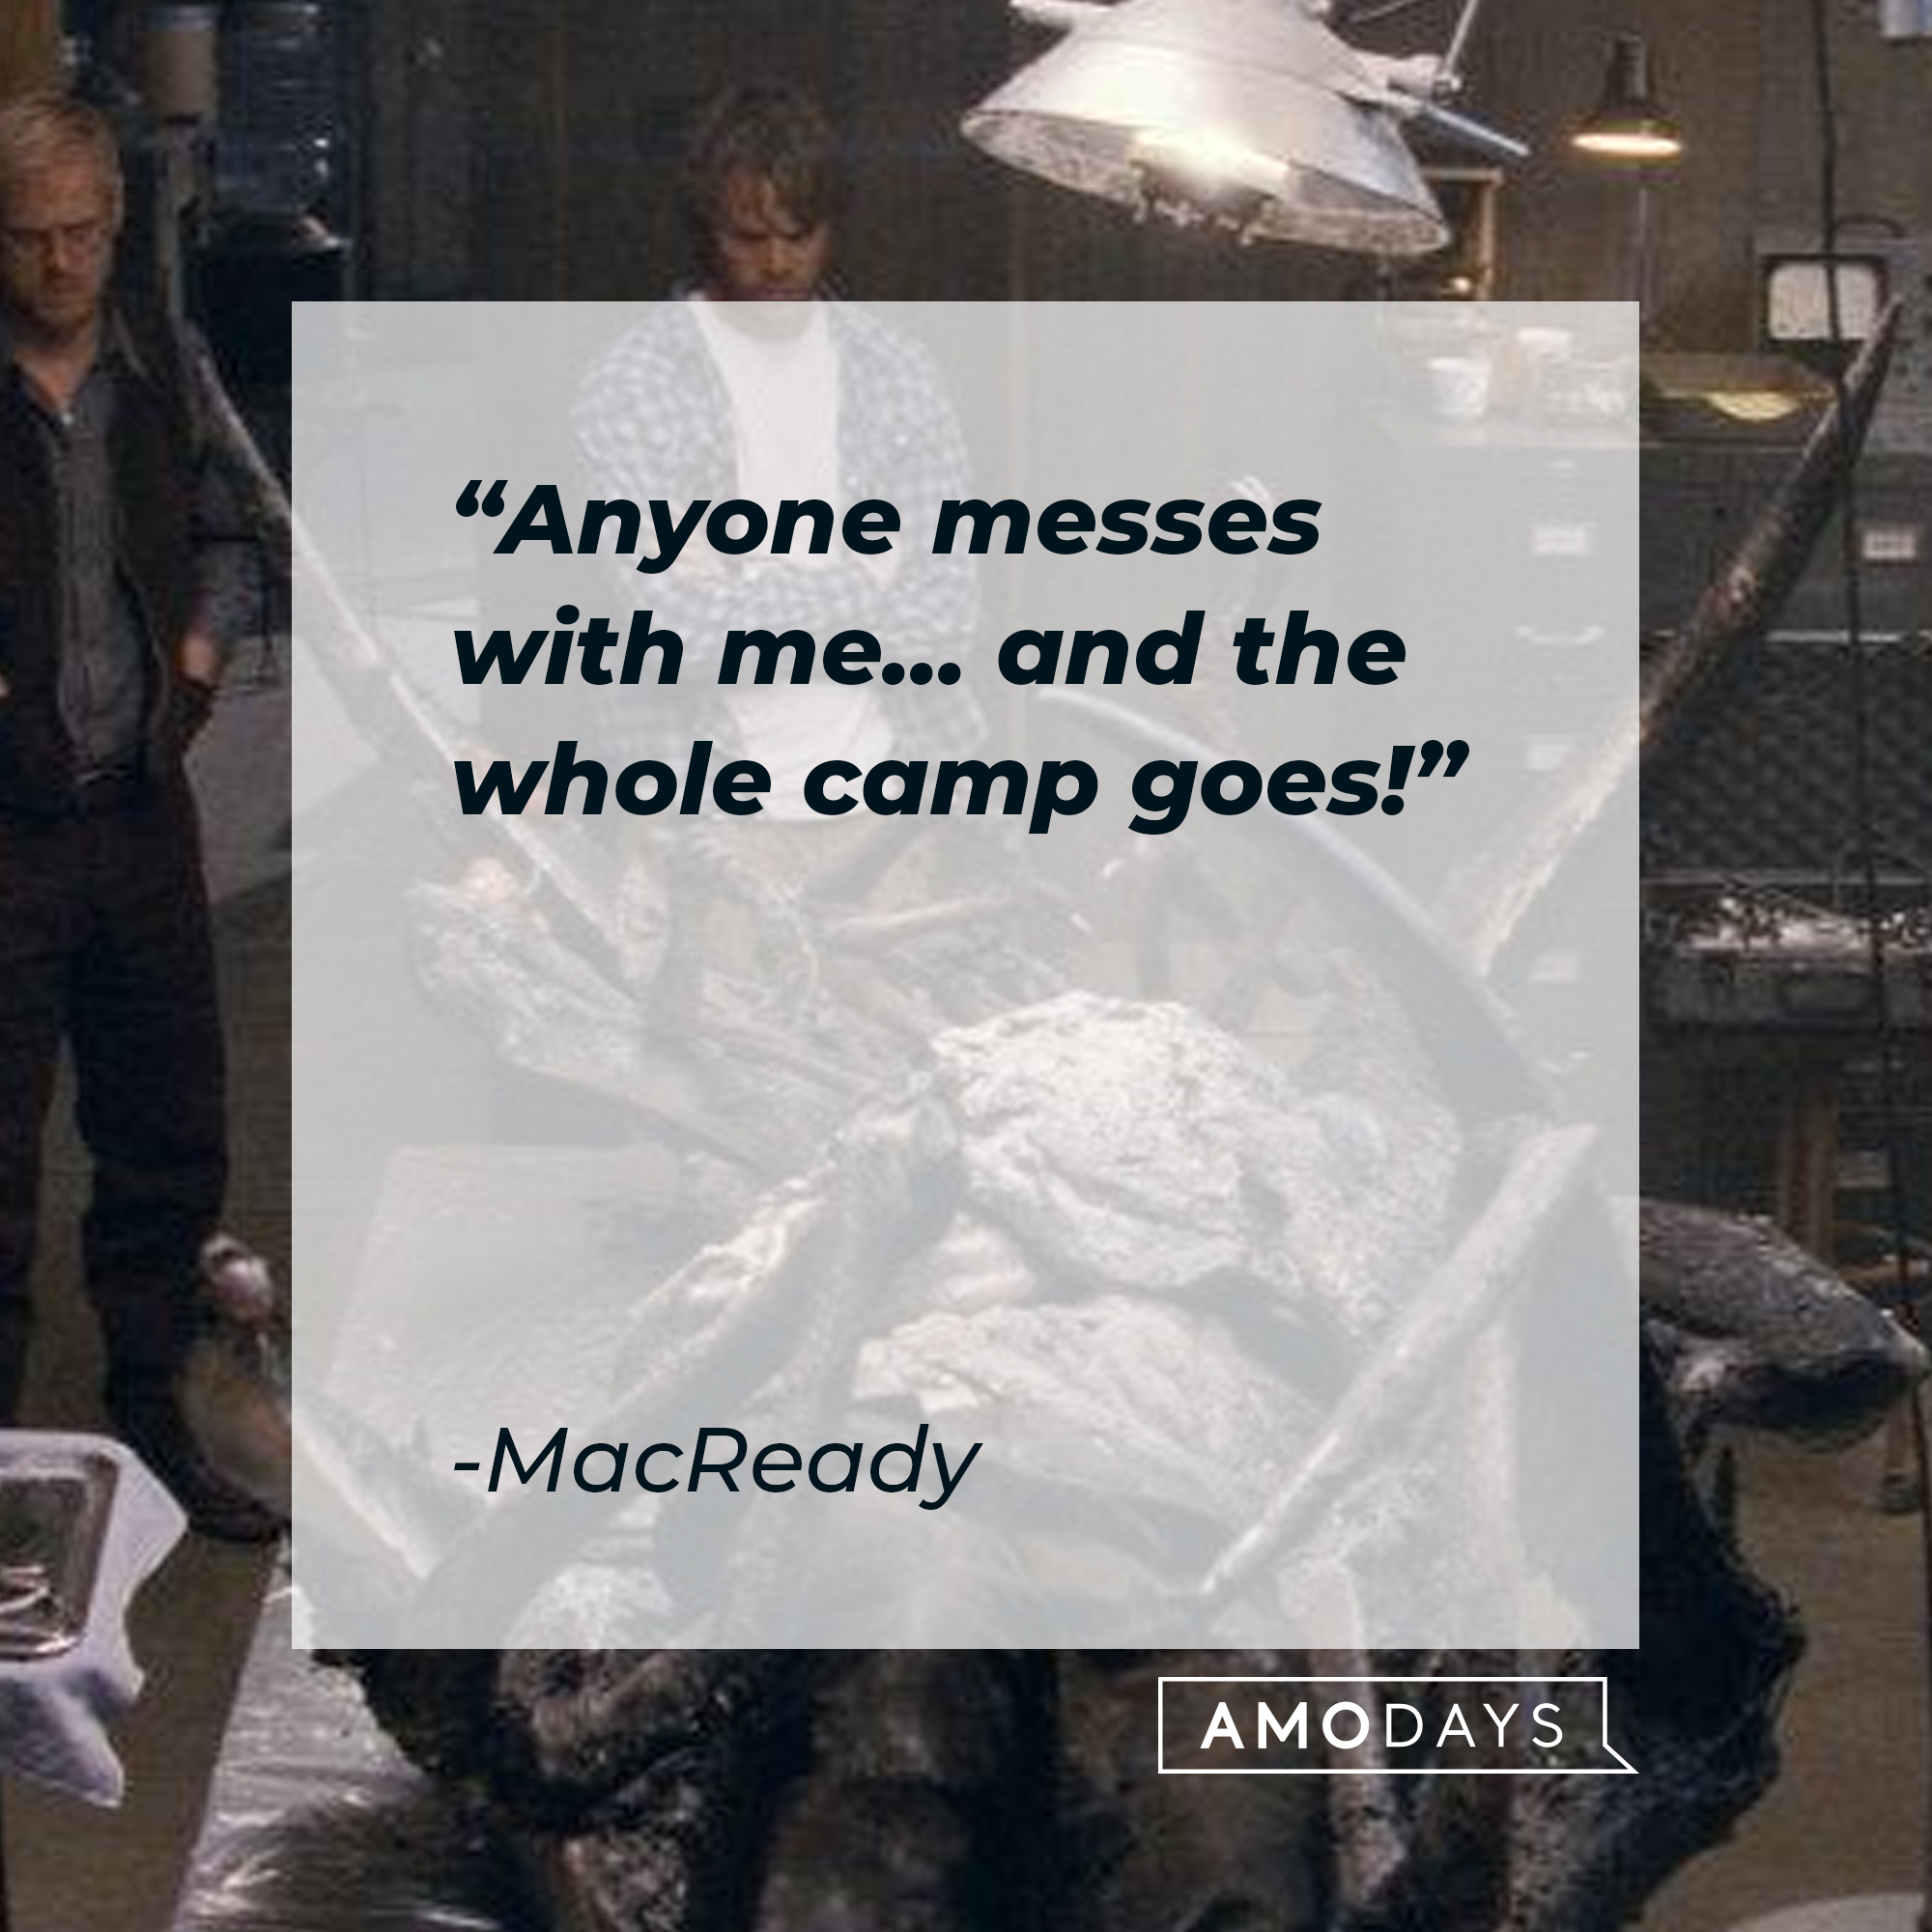 MacReady's quote: "Anyone messes with me... and the whole camp goes!" | Source: facebook.com/thethingmovie